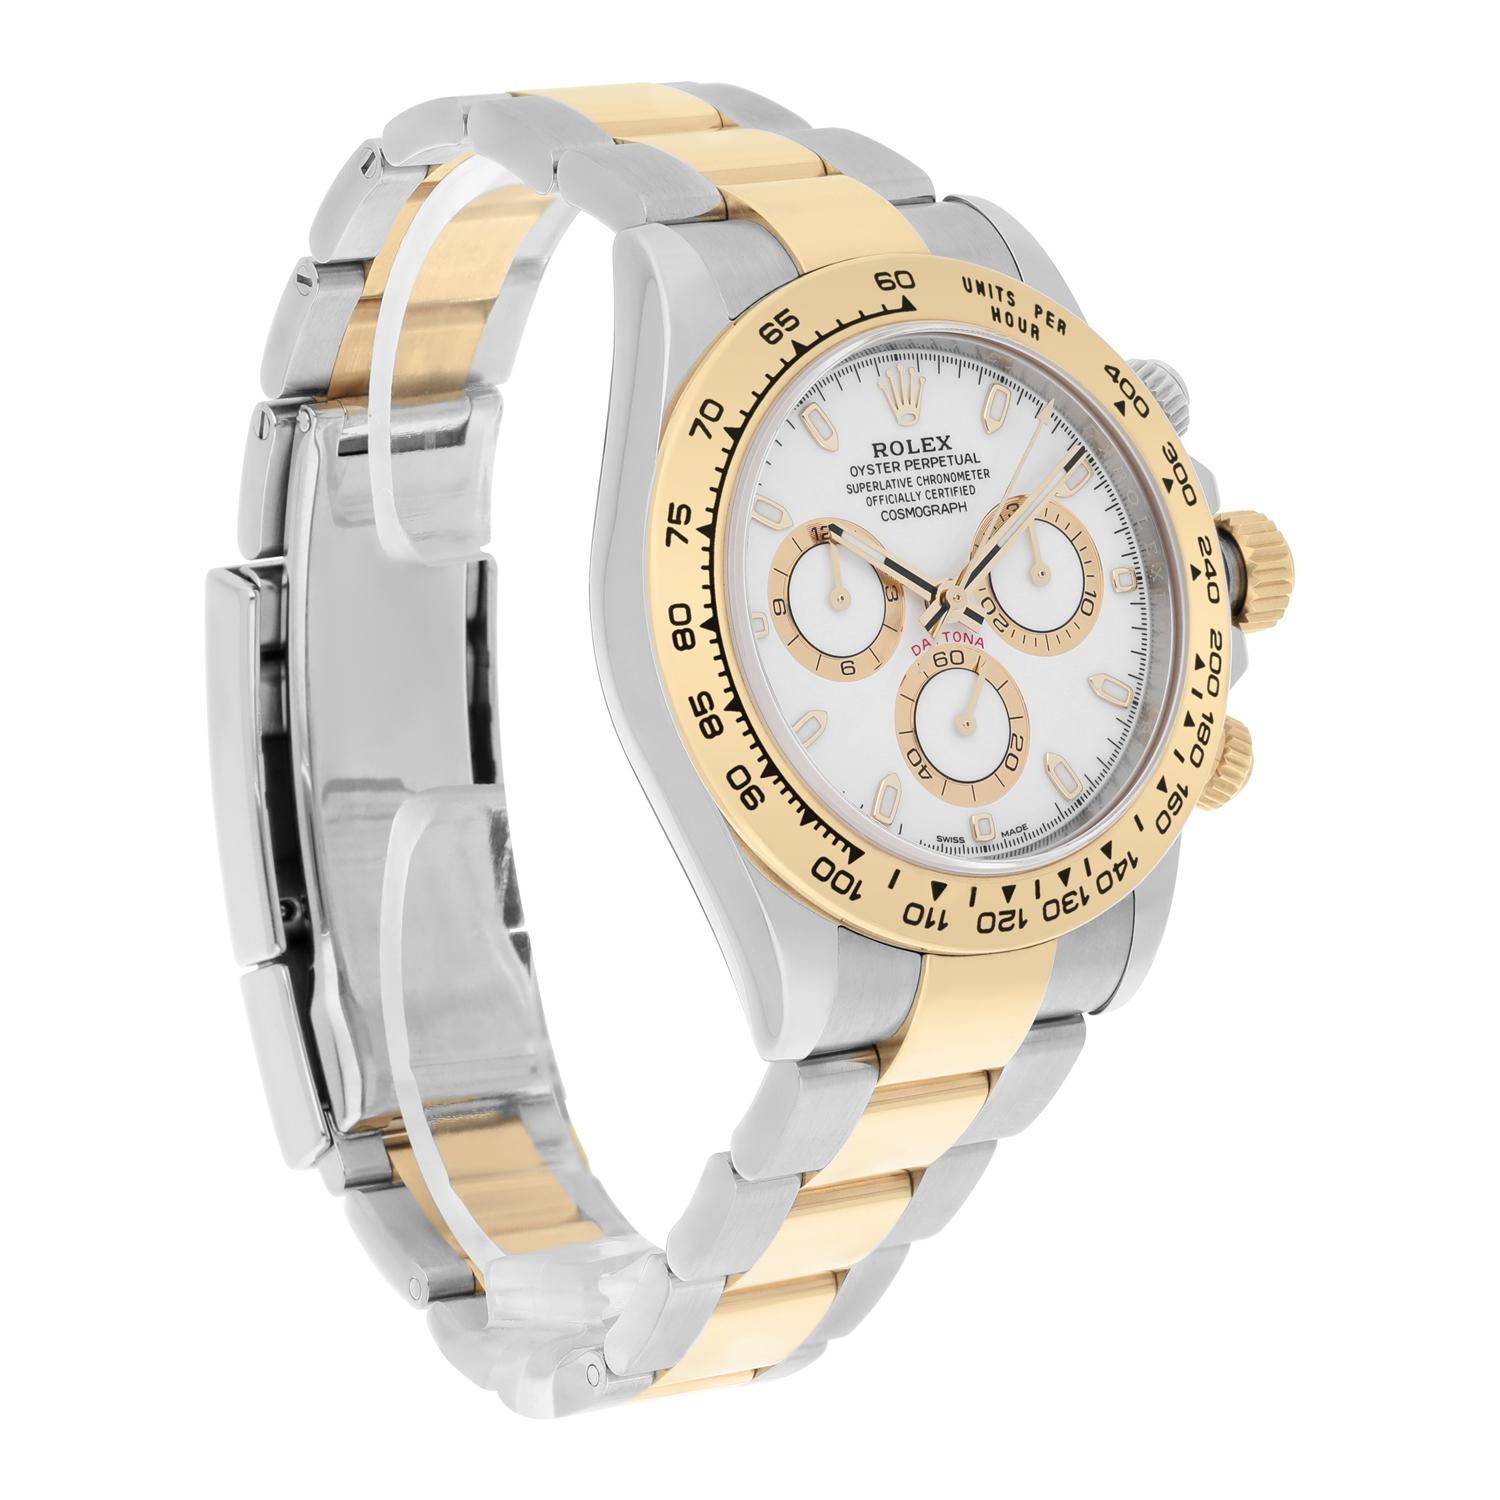 Modern Rolex Cosmograph Daytona Stainless Steel/Yellow Gold White Dial Watch 116503 For Sale